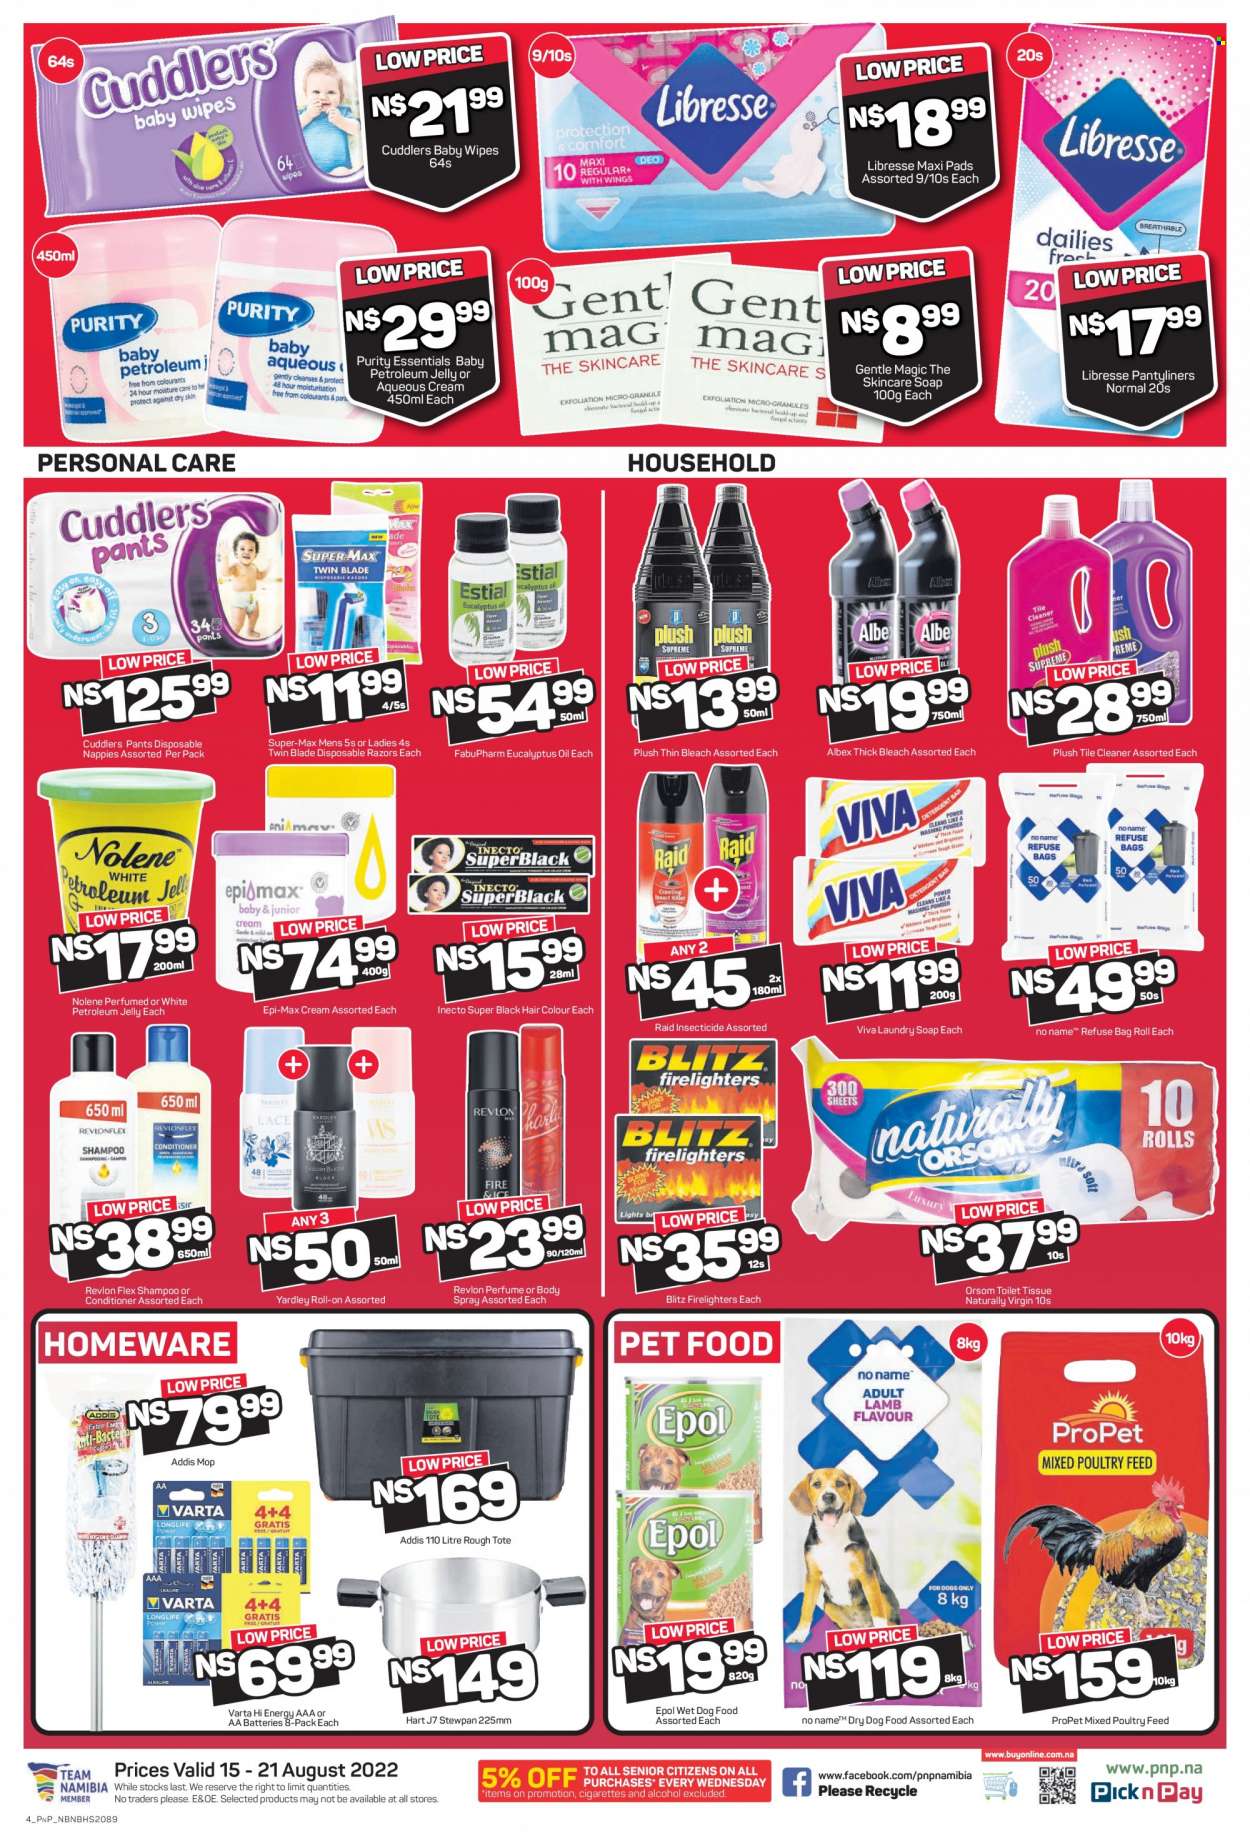 Pick n Pay catalogue  - 15/08/2022 - 21/08/2022 - Sales products - oil, alcohol, Purity, wipes, pants, baby wipes, nappies, bleach, cleaner, thick bleach, laundry soap bar, shampoo, soap, sanitary pads, pantyliners, petroleum jelly, Epi-Max, Gentle Magic, conditioner, Revlon, hair color, body spray, disposable razor, insecticide, Raid, battery, Varta, aa batteries, animal food, dog food, wet dog food, dry dog food. Page 2.